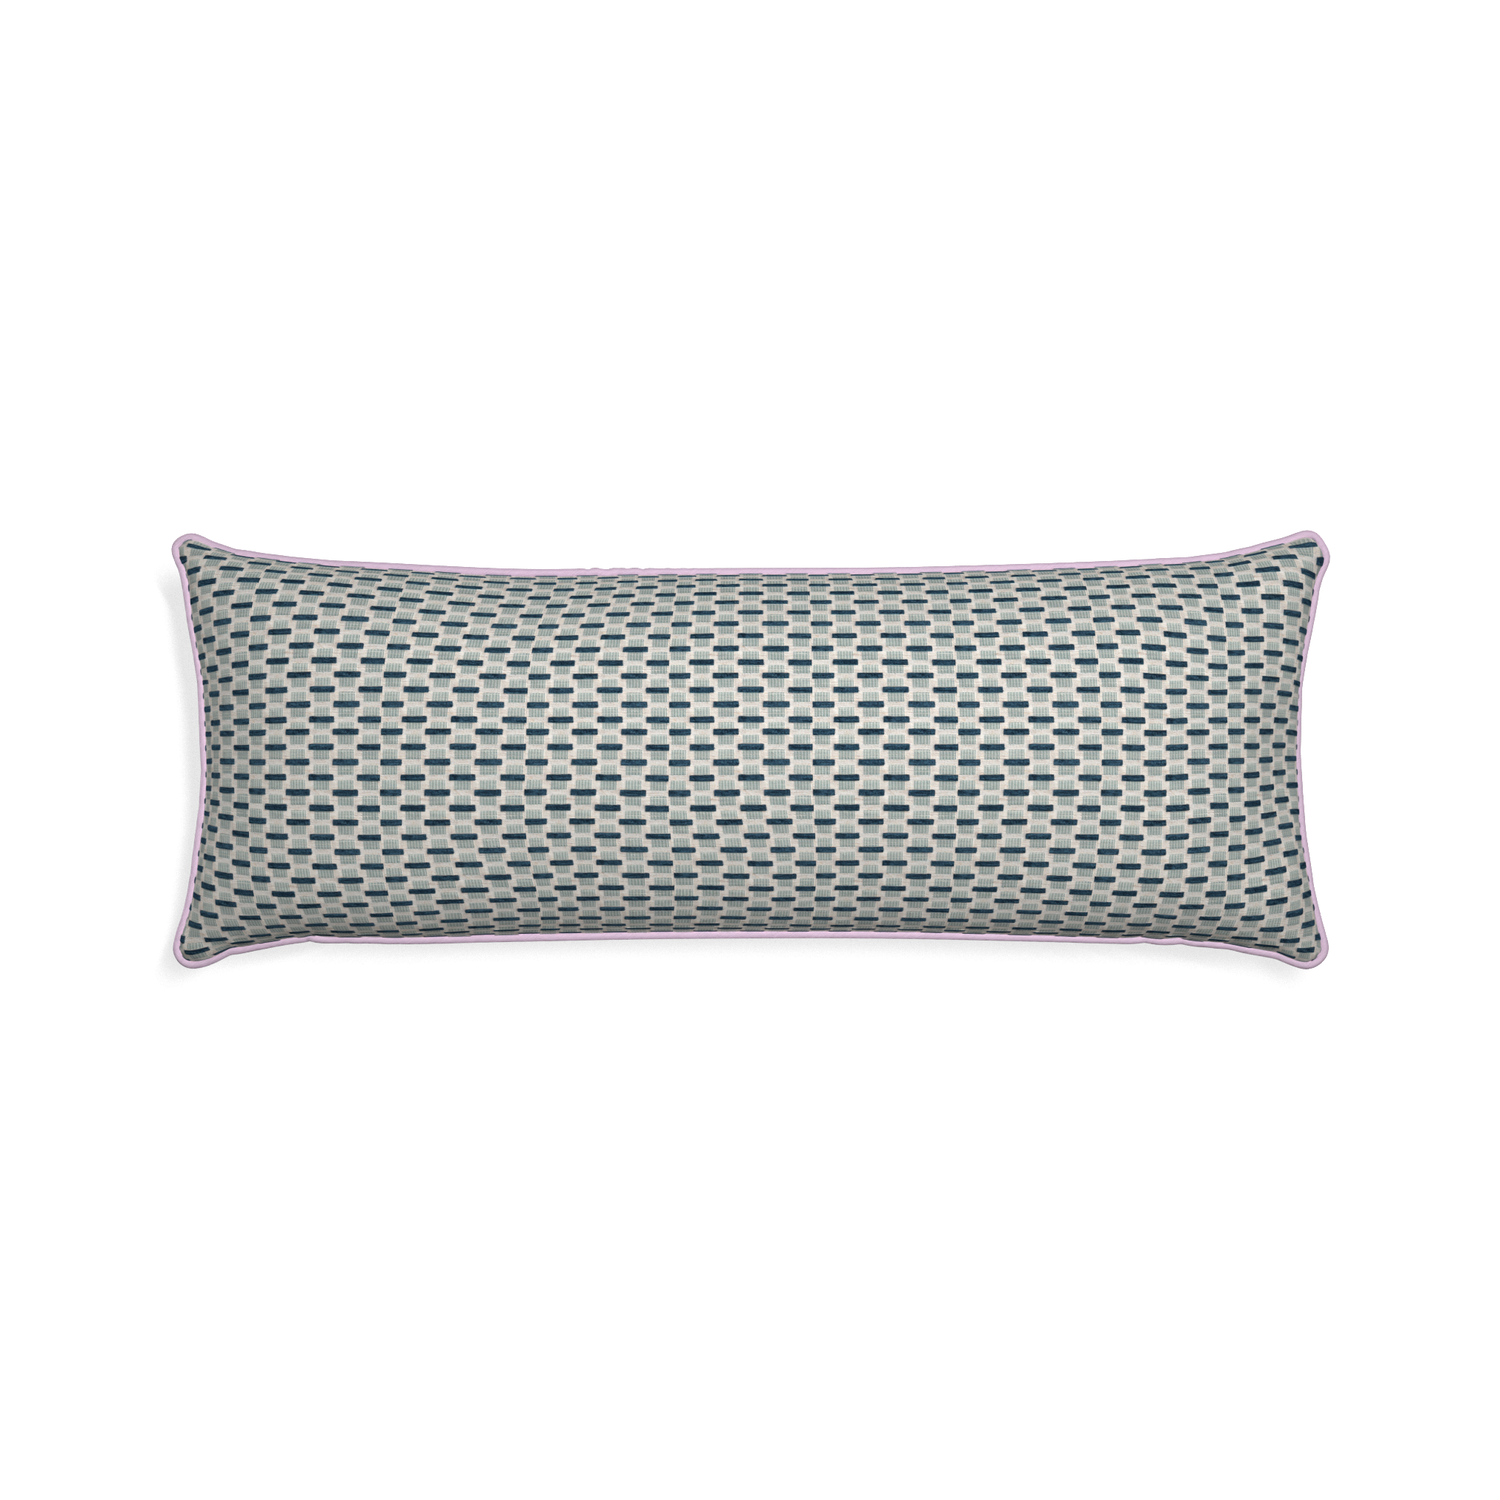 Xl-lumbar willow amalfi custom blue geometric chenillepillow with l piping on white background